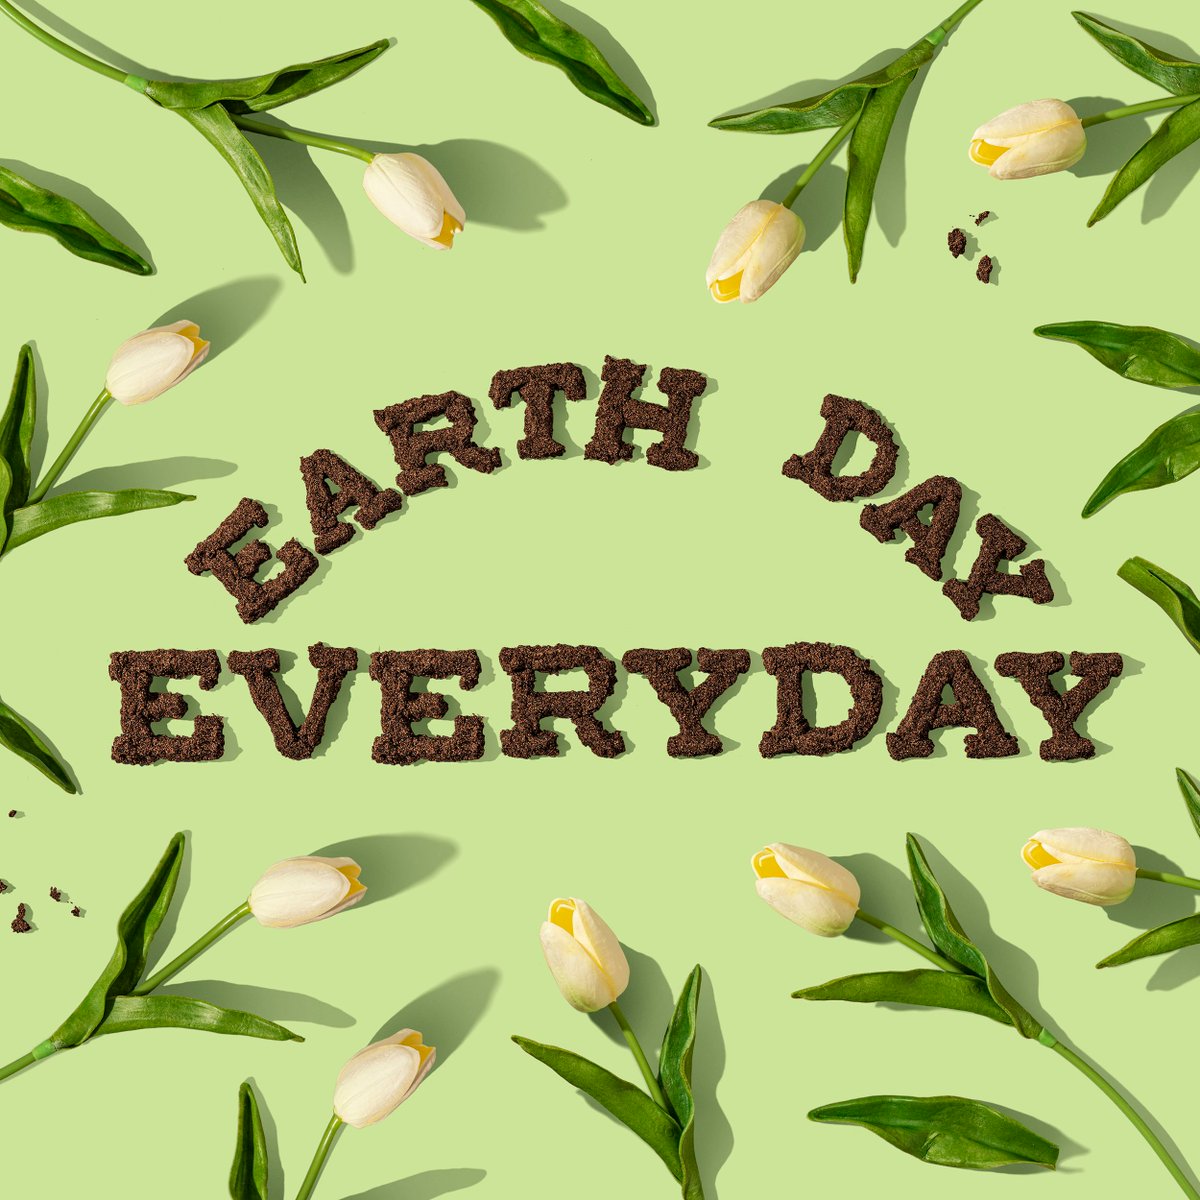 Planet v Plastics is the theme of Earth Day 2024 and we have a fun week lined up at King's to mark this annual celebration of the planet - starting today with a quiz. With several environmental clubs taking place each week at King's, it's a subject close to our hearts. #earthday